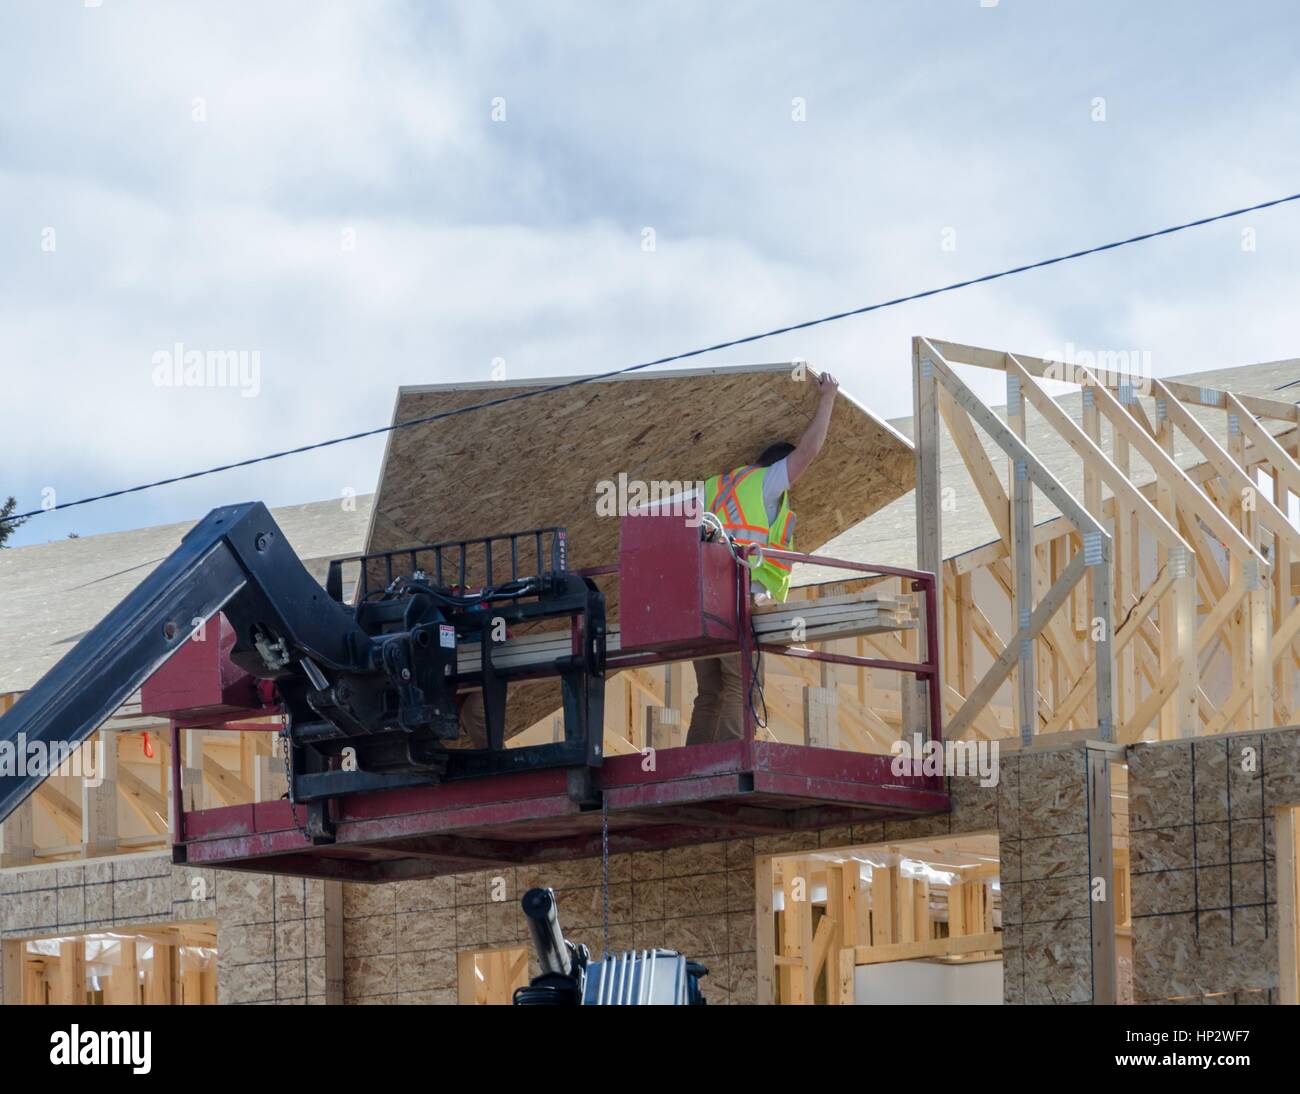 Construction workers load materials at a residential building site in Calgary, Alberta, Canada. Stock Photo